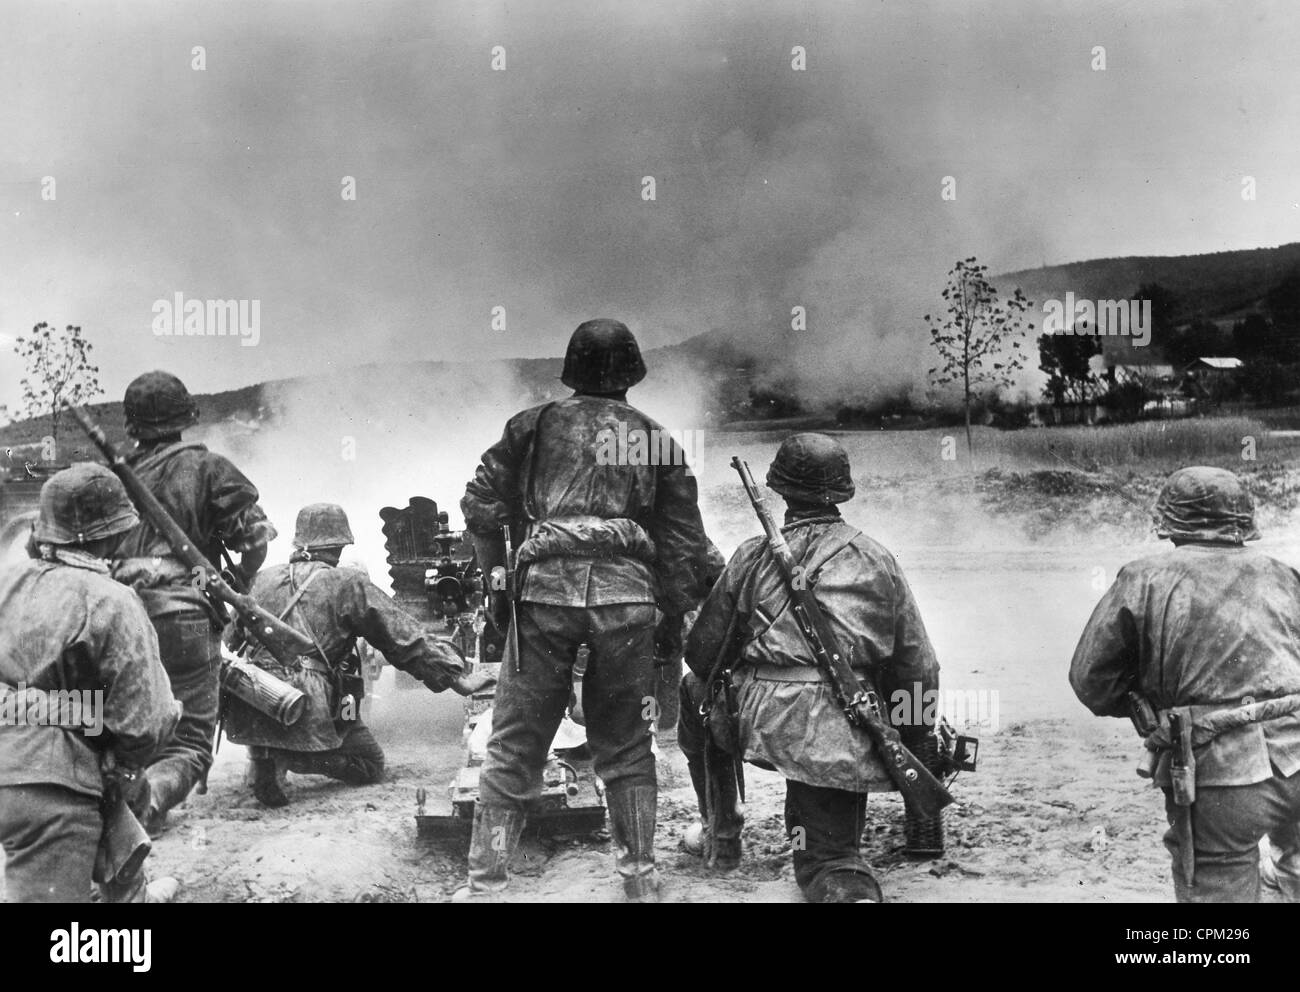 Soldiers of the Waffen-SS bombards partisans in a village, 1941 Stock Photo